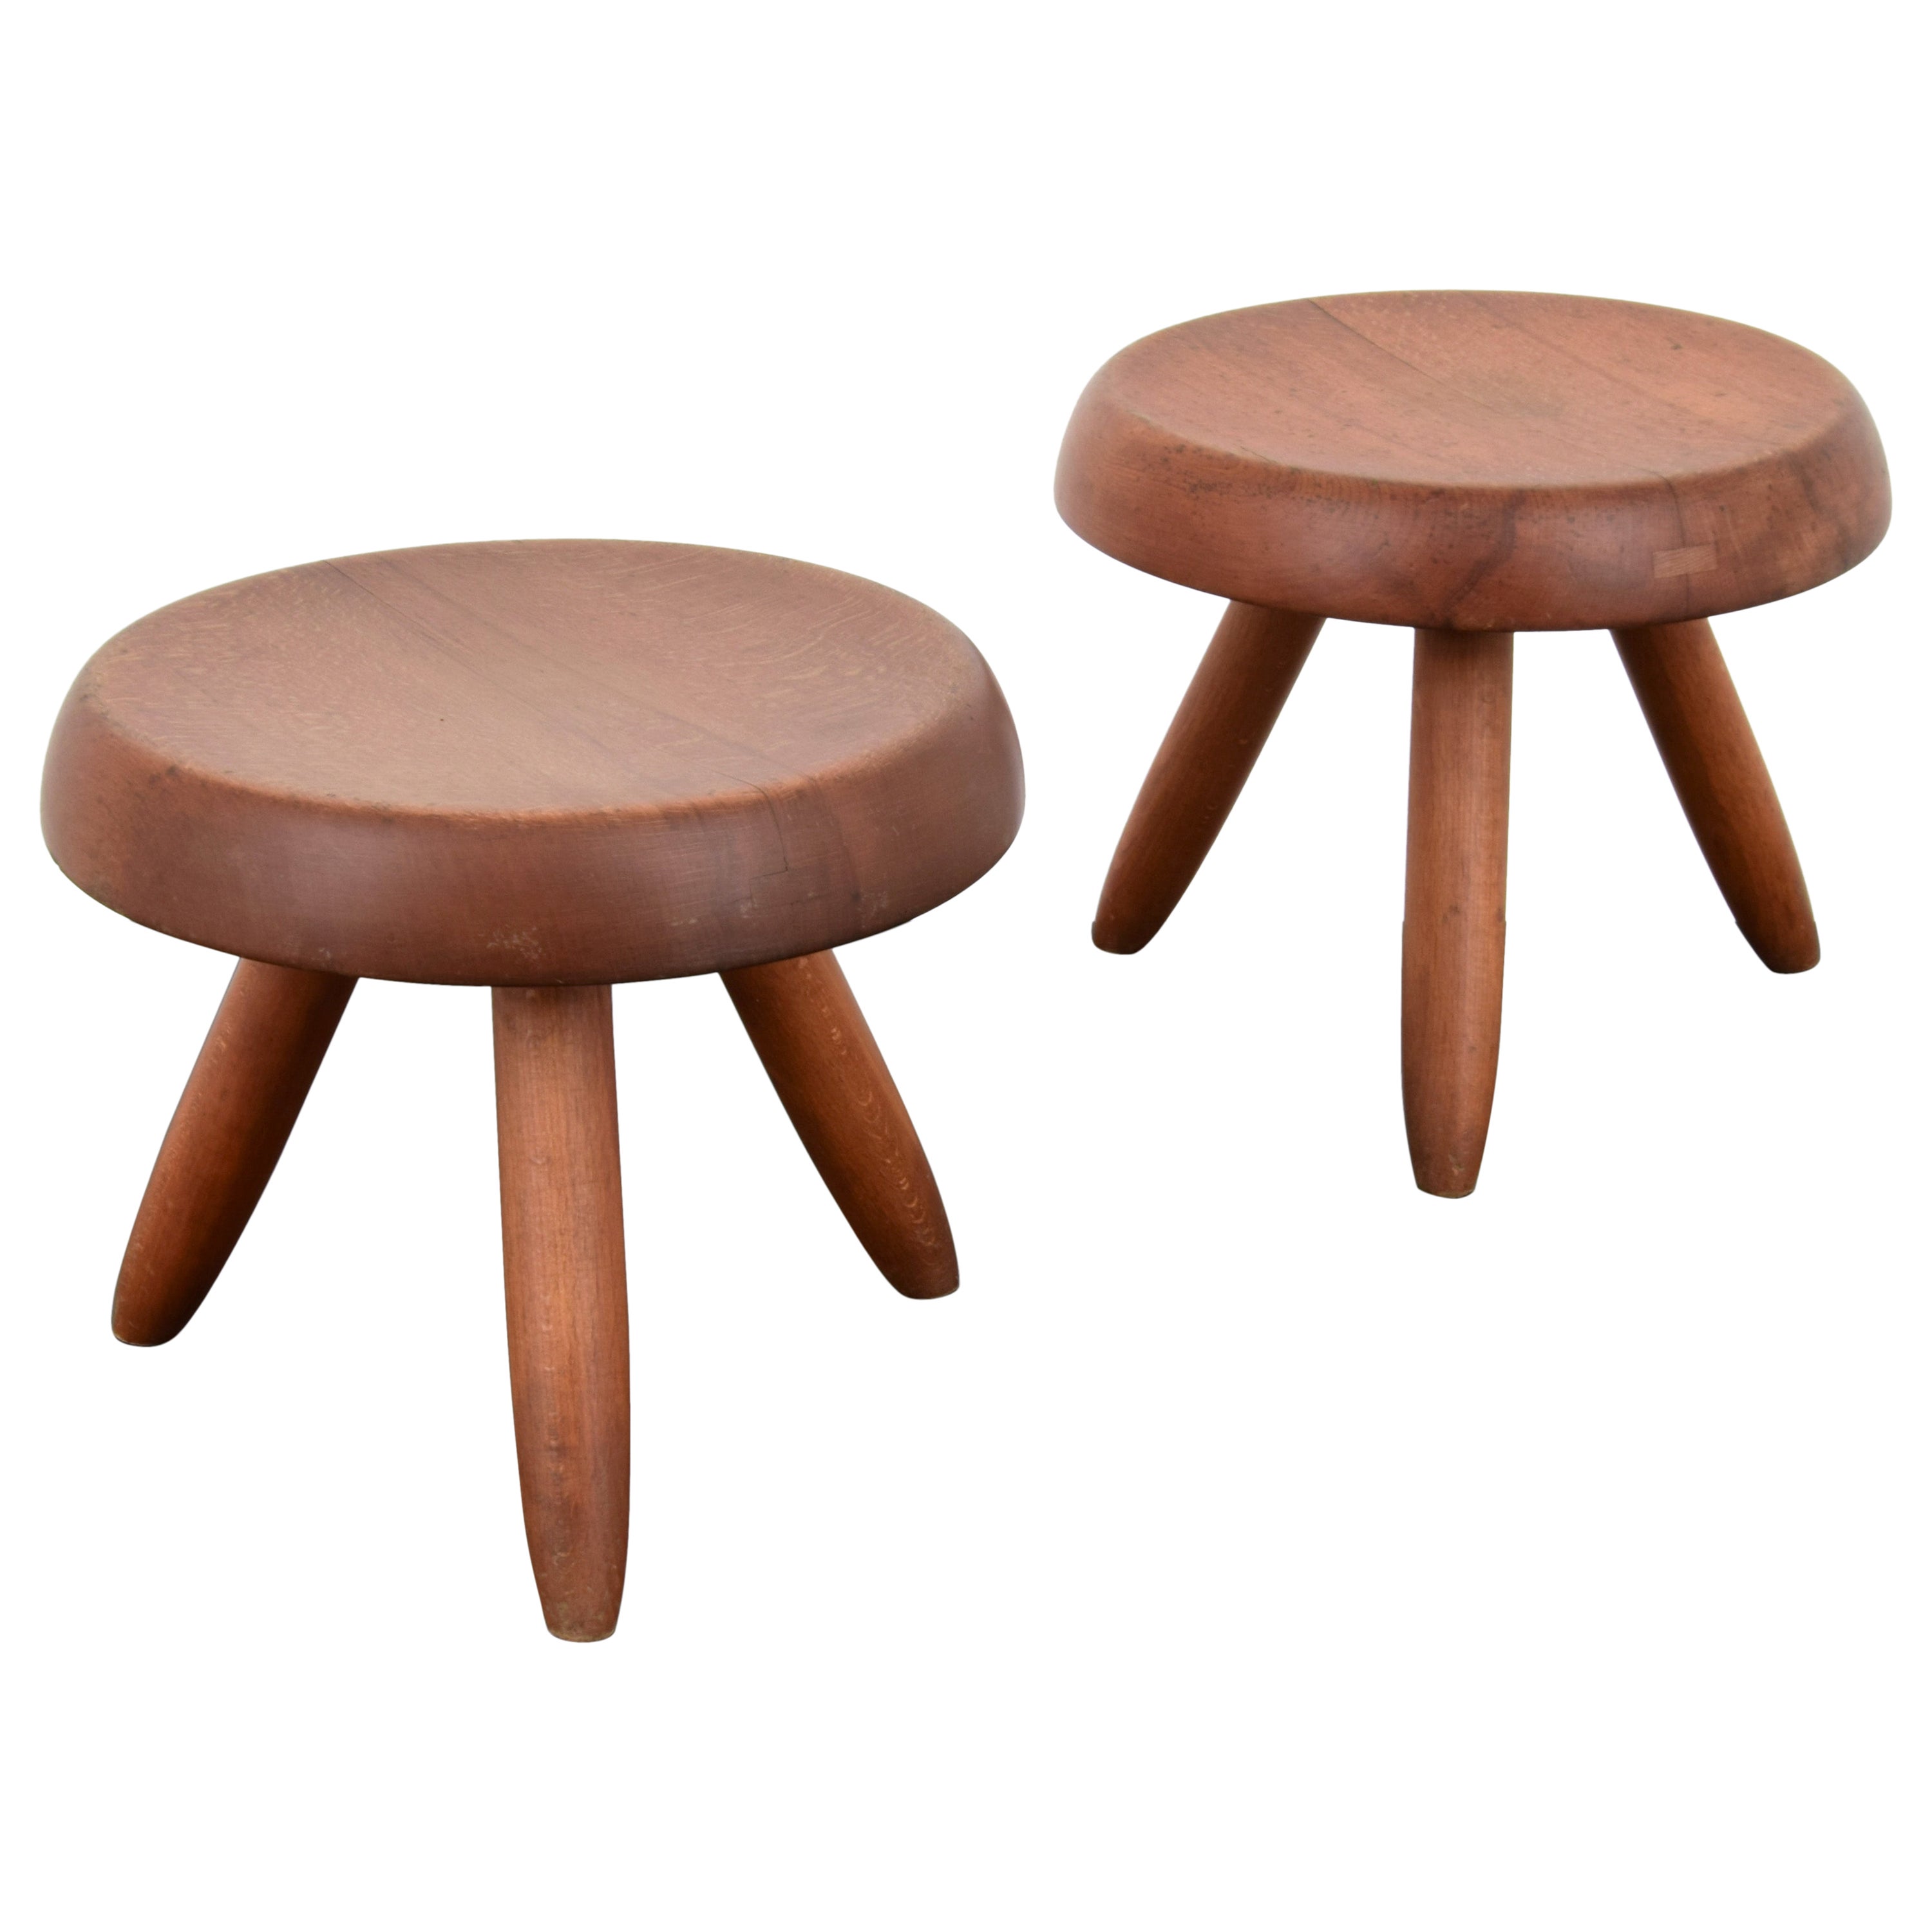 Charlotte Perriand Low Stool For Sale